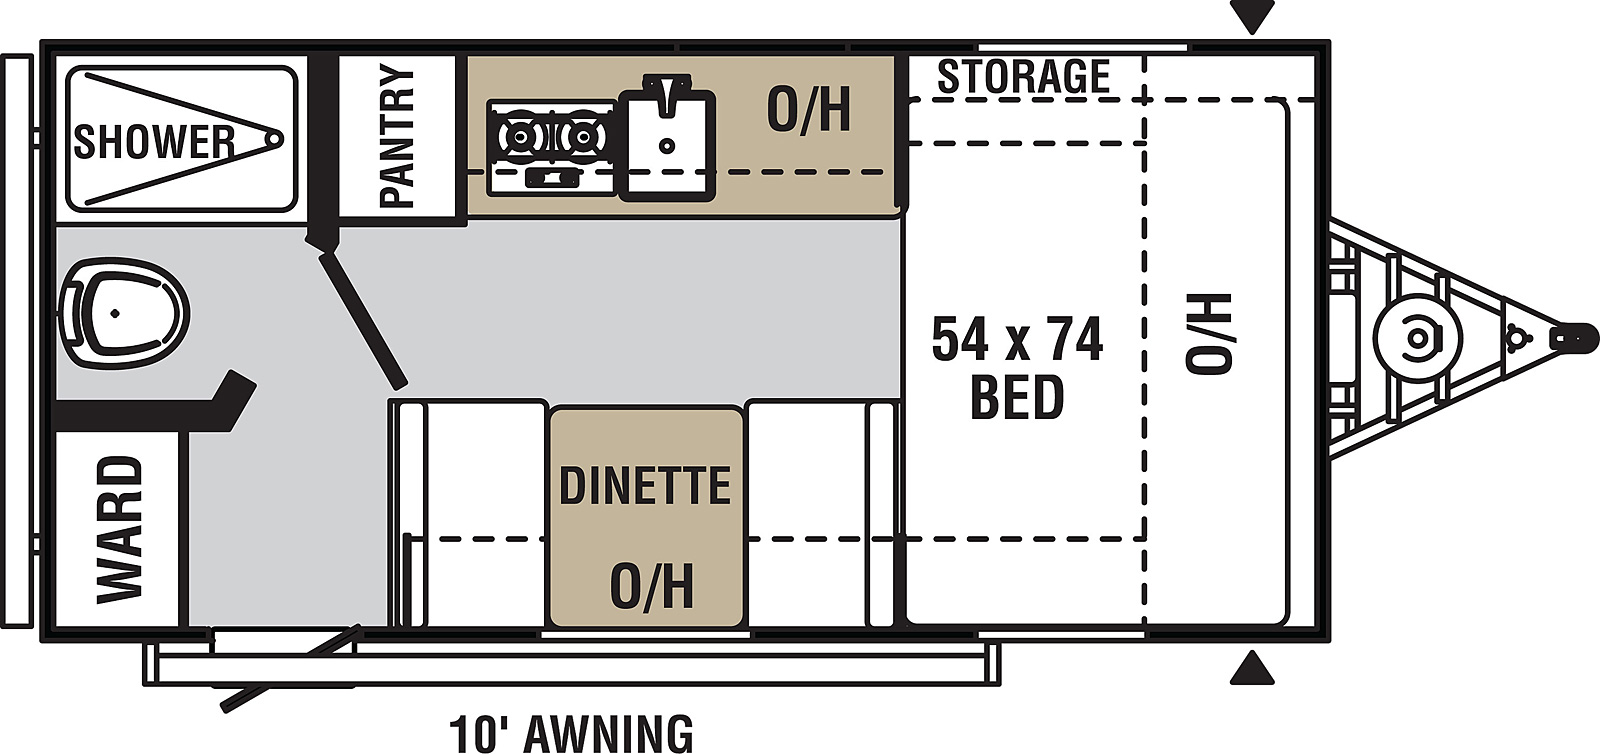 Viking Ultra-Lite 16SFB floorplan. The 16SFB has no slide outs and one entry door.